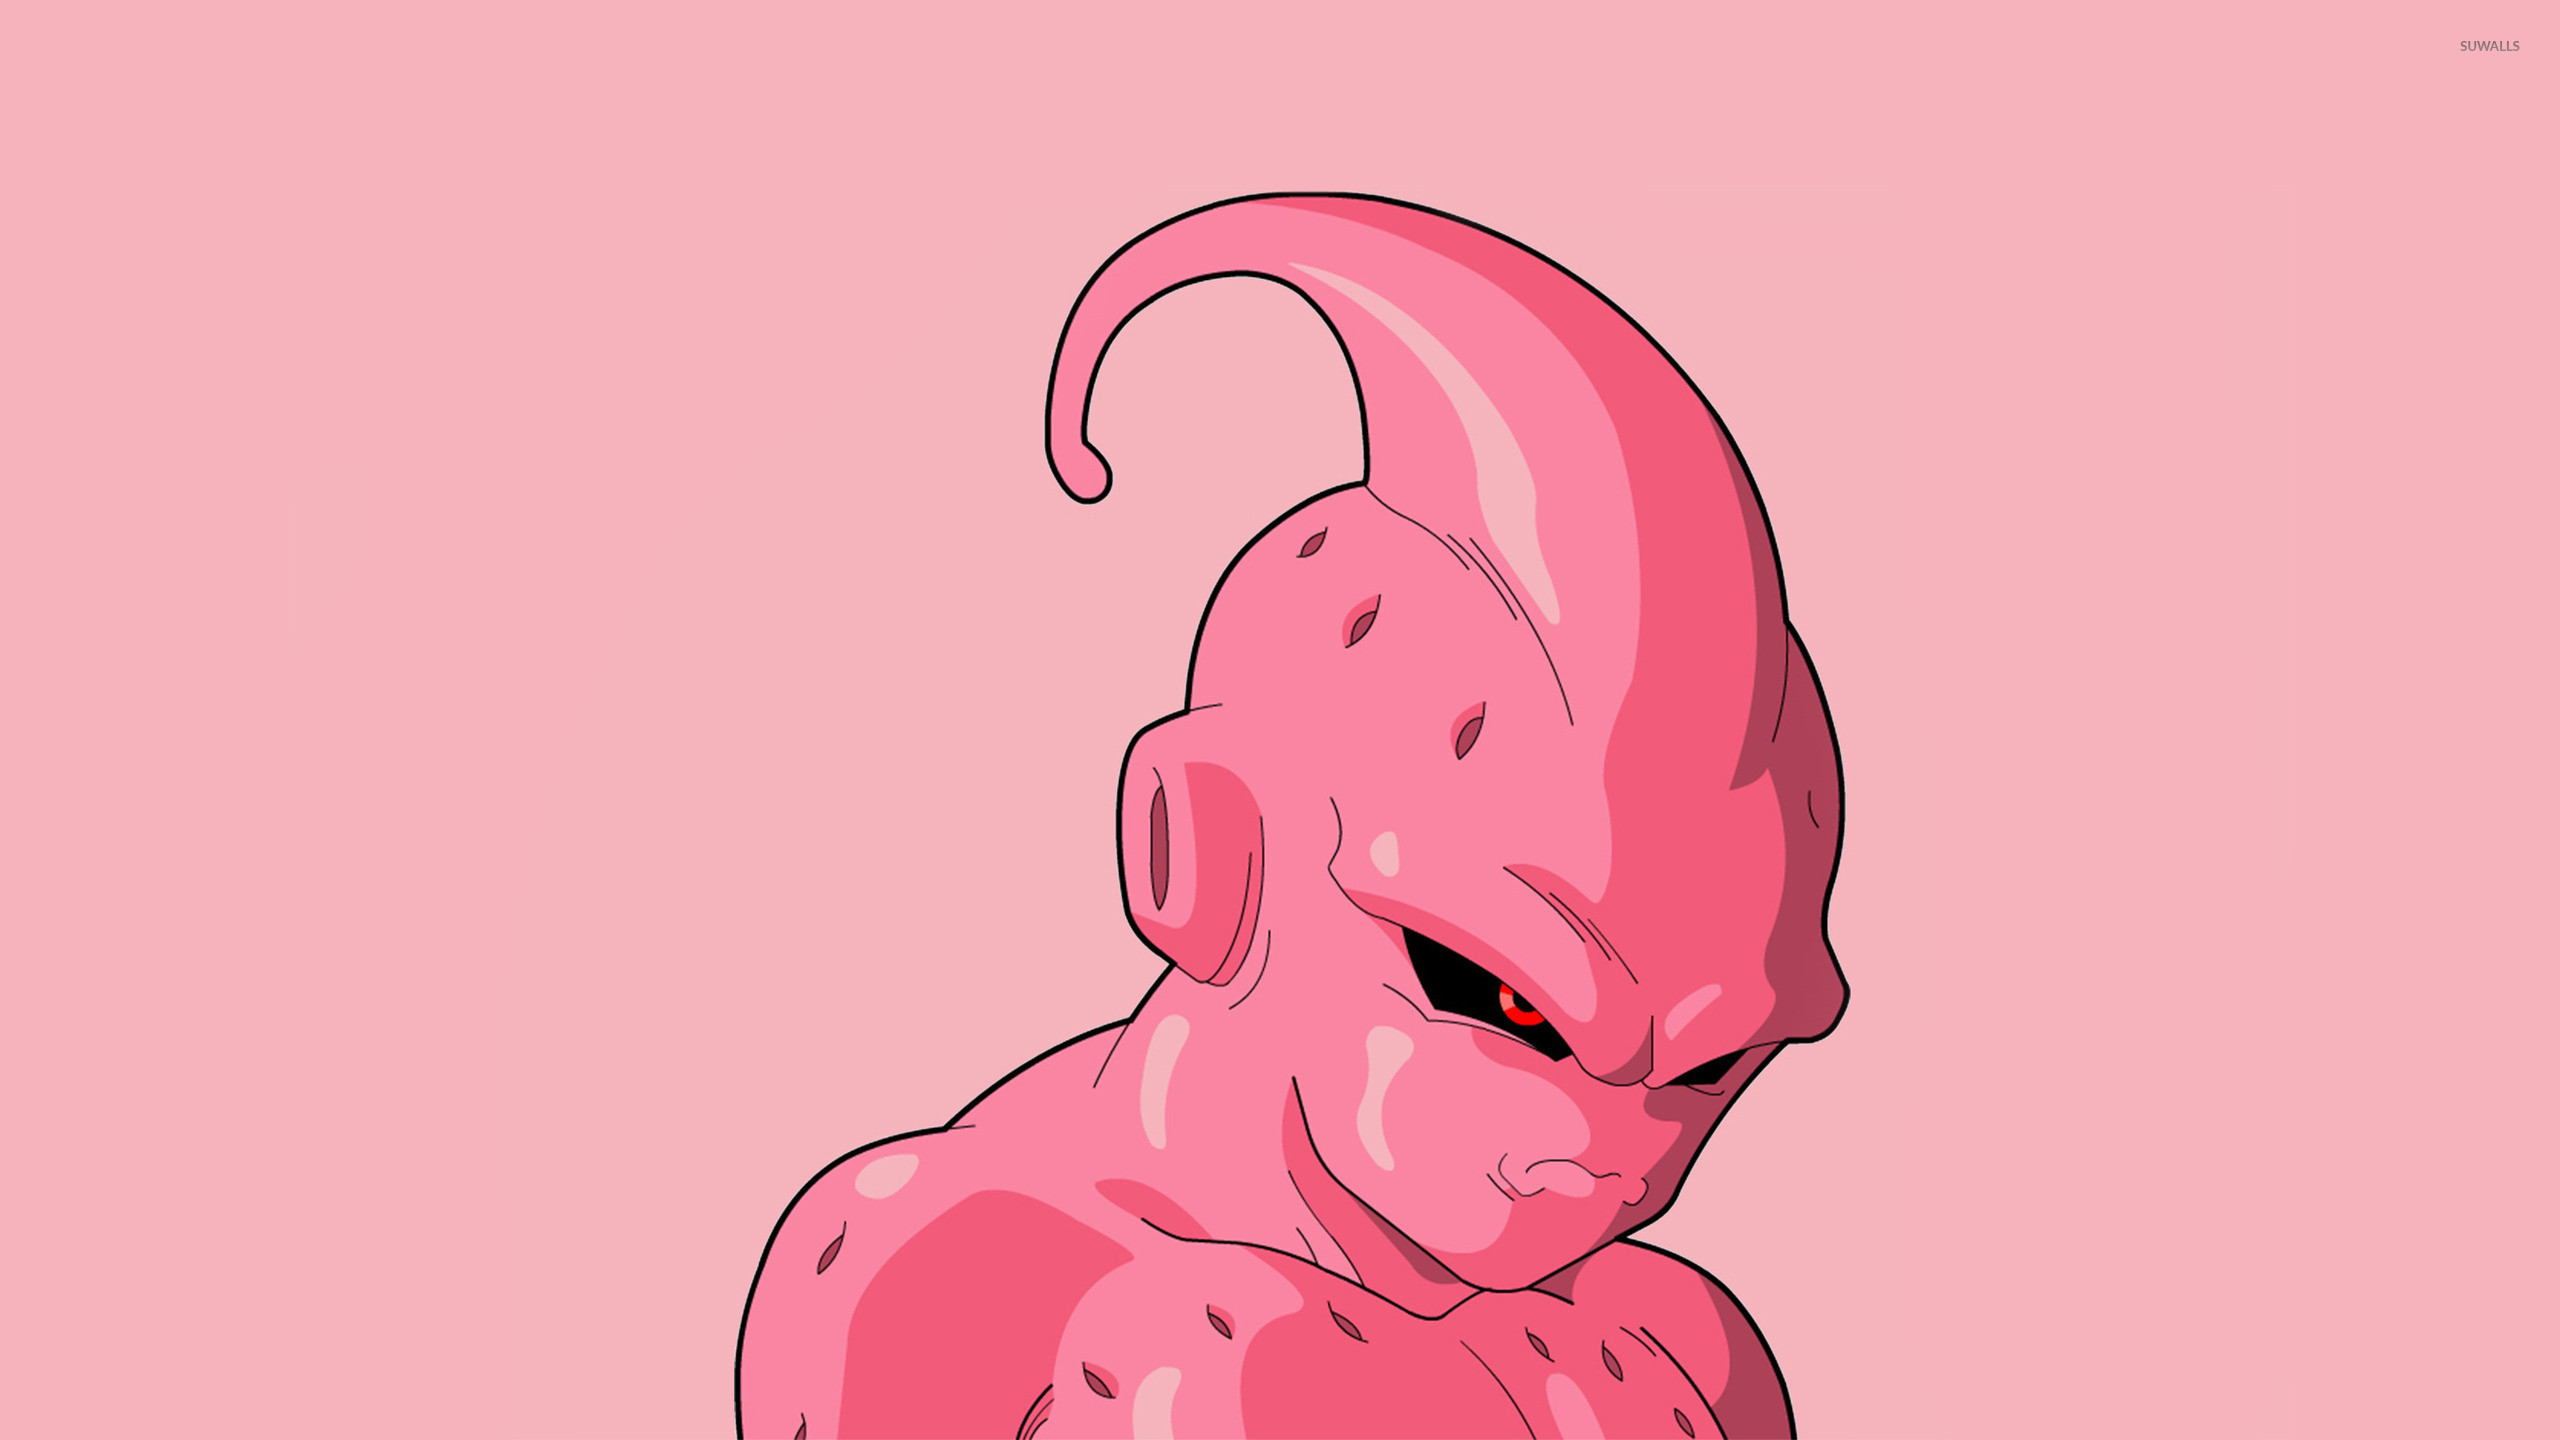 Download Kid Buu Wallpaper by DBjerzy - 78 - Free on ZEDGE™ now. Browse  millions of popul…